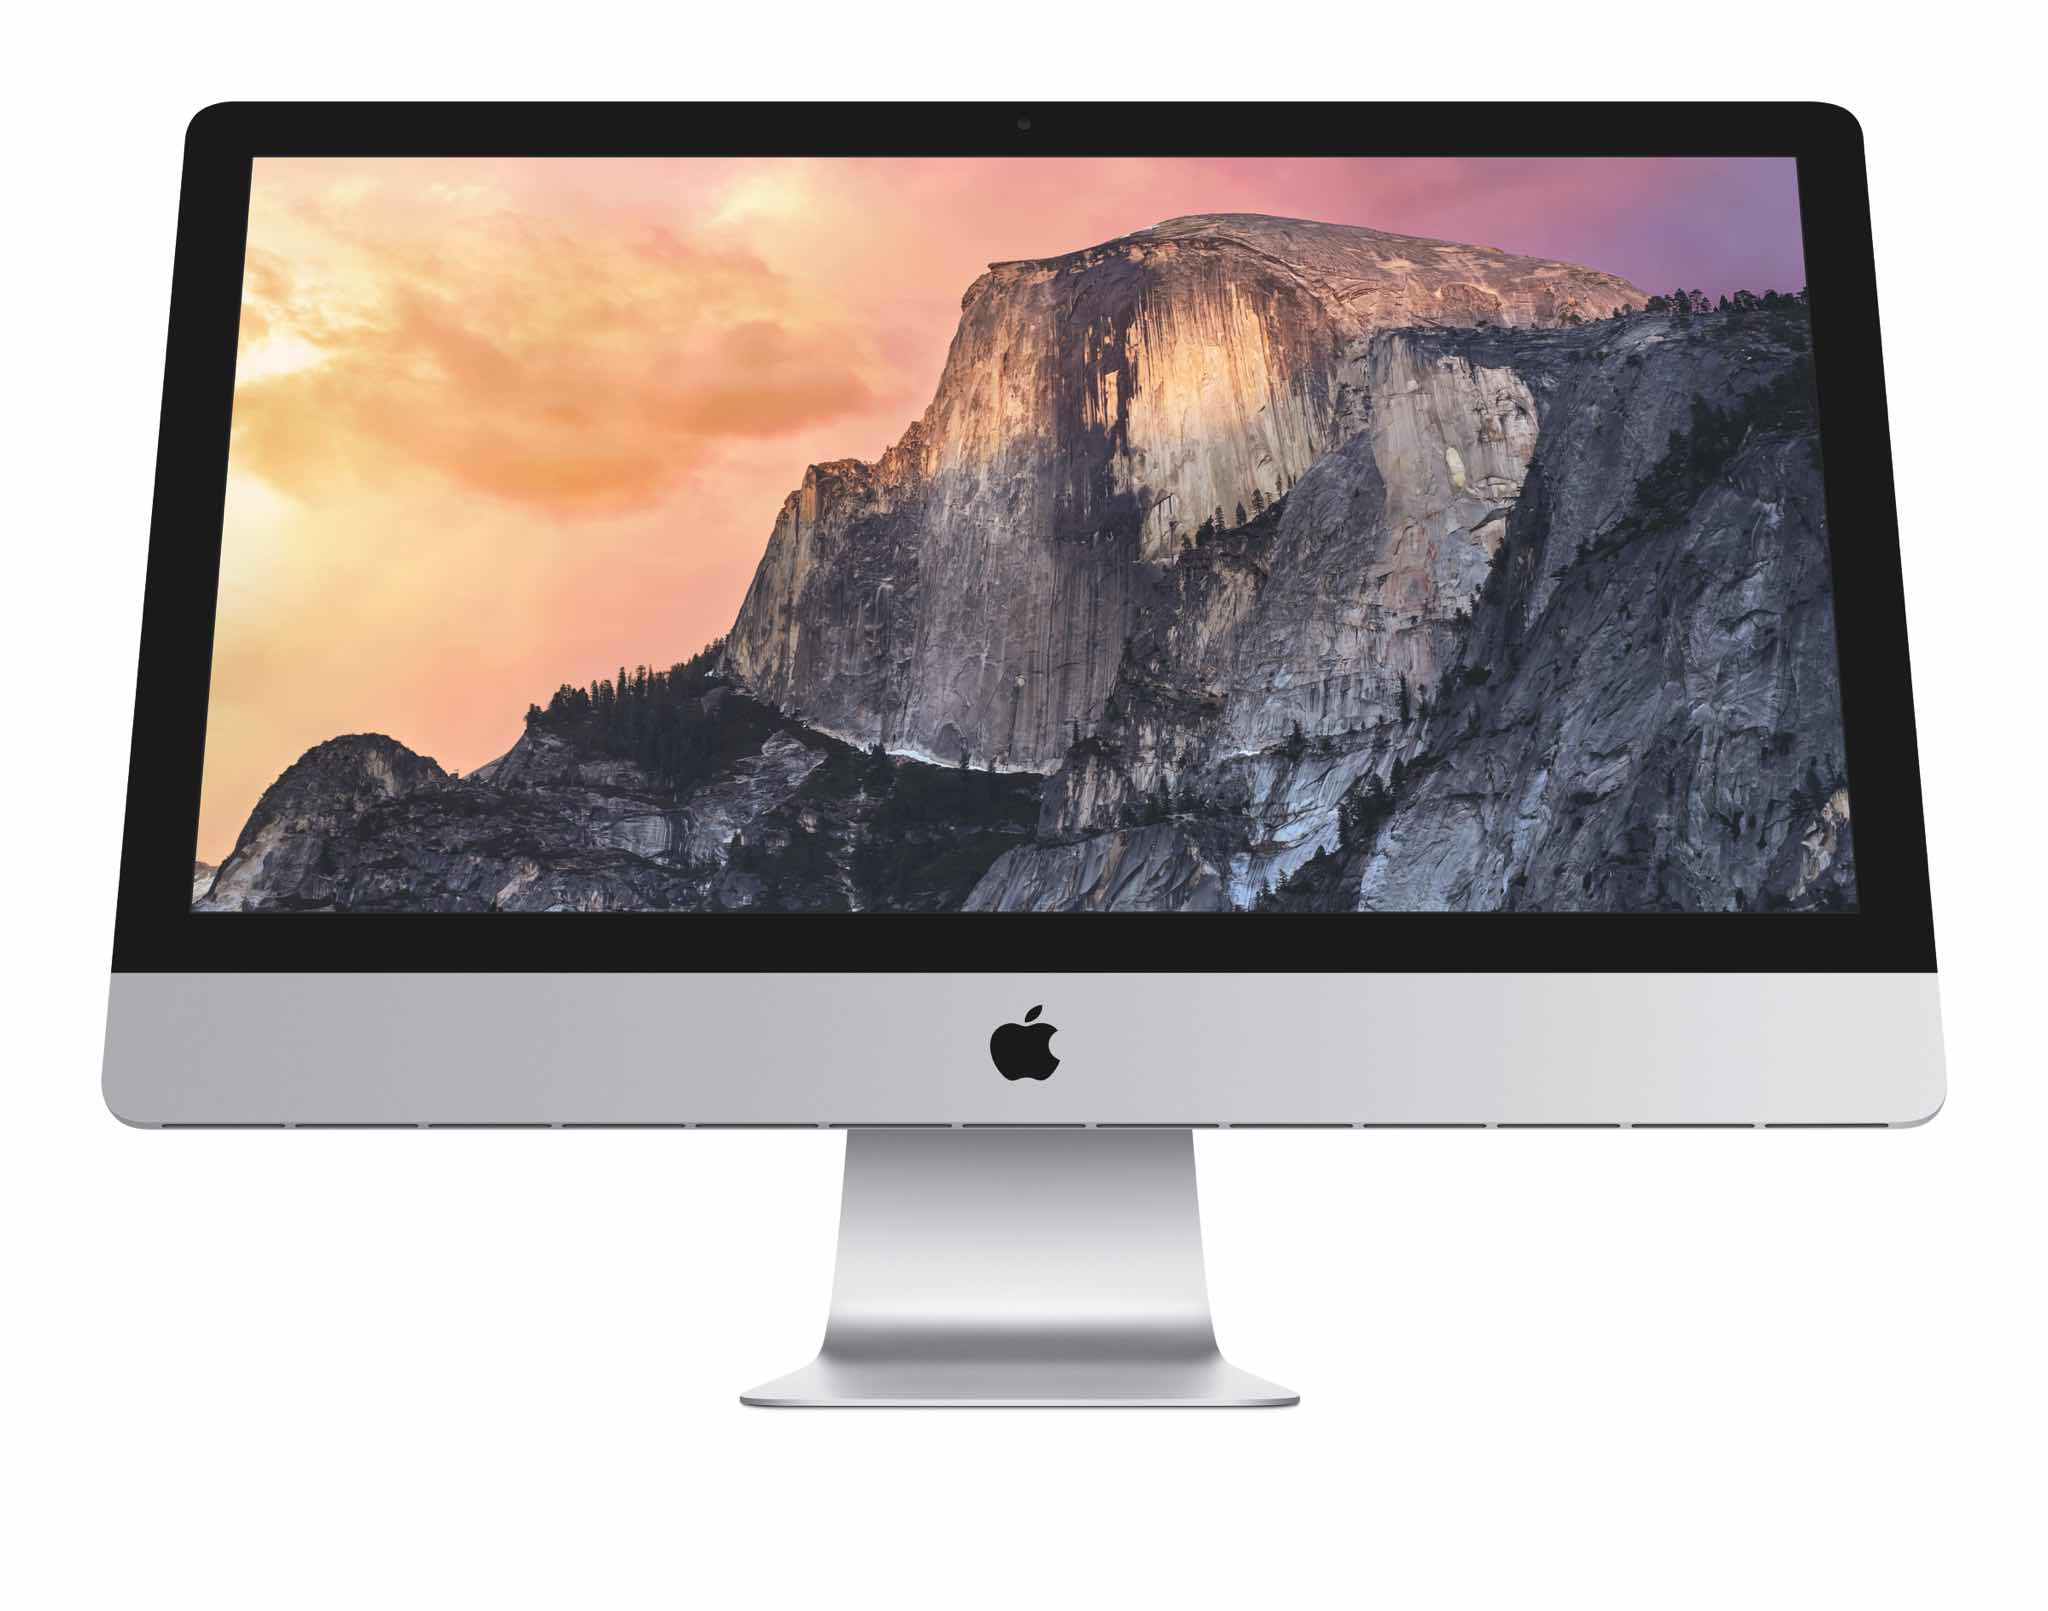 Review: 27-inch iMac with Retina 5K Display – Six Colors